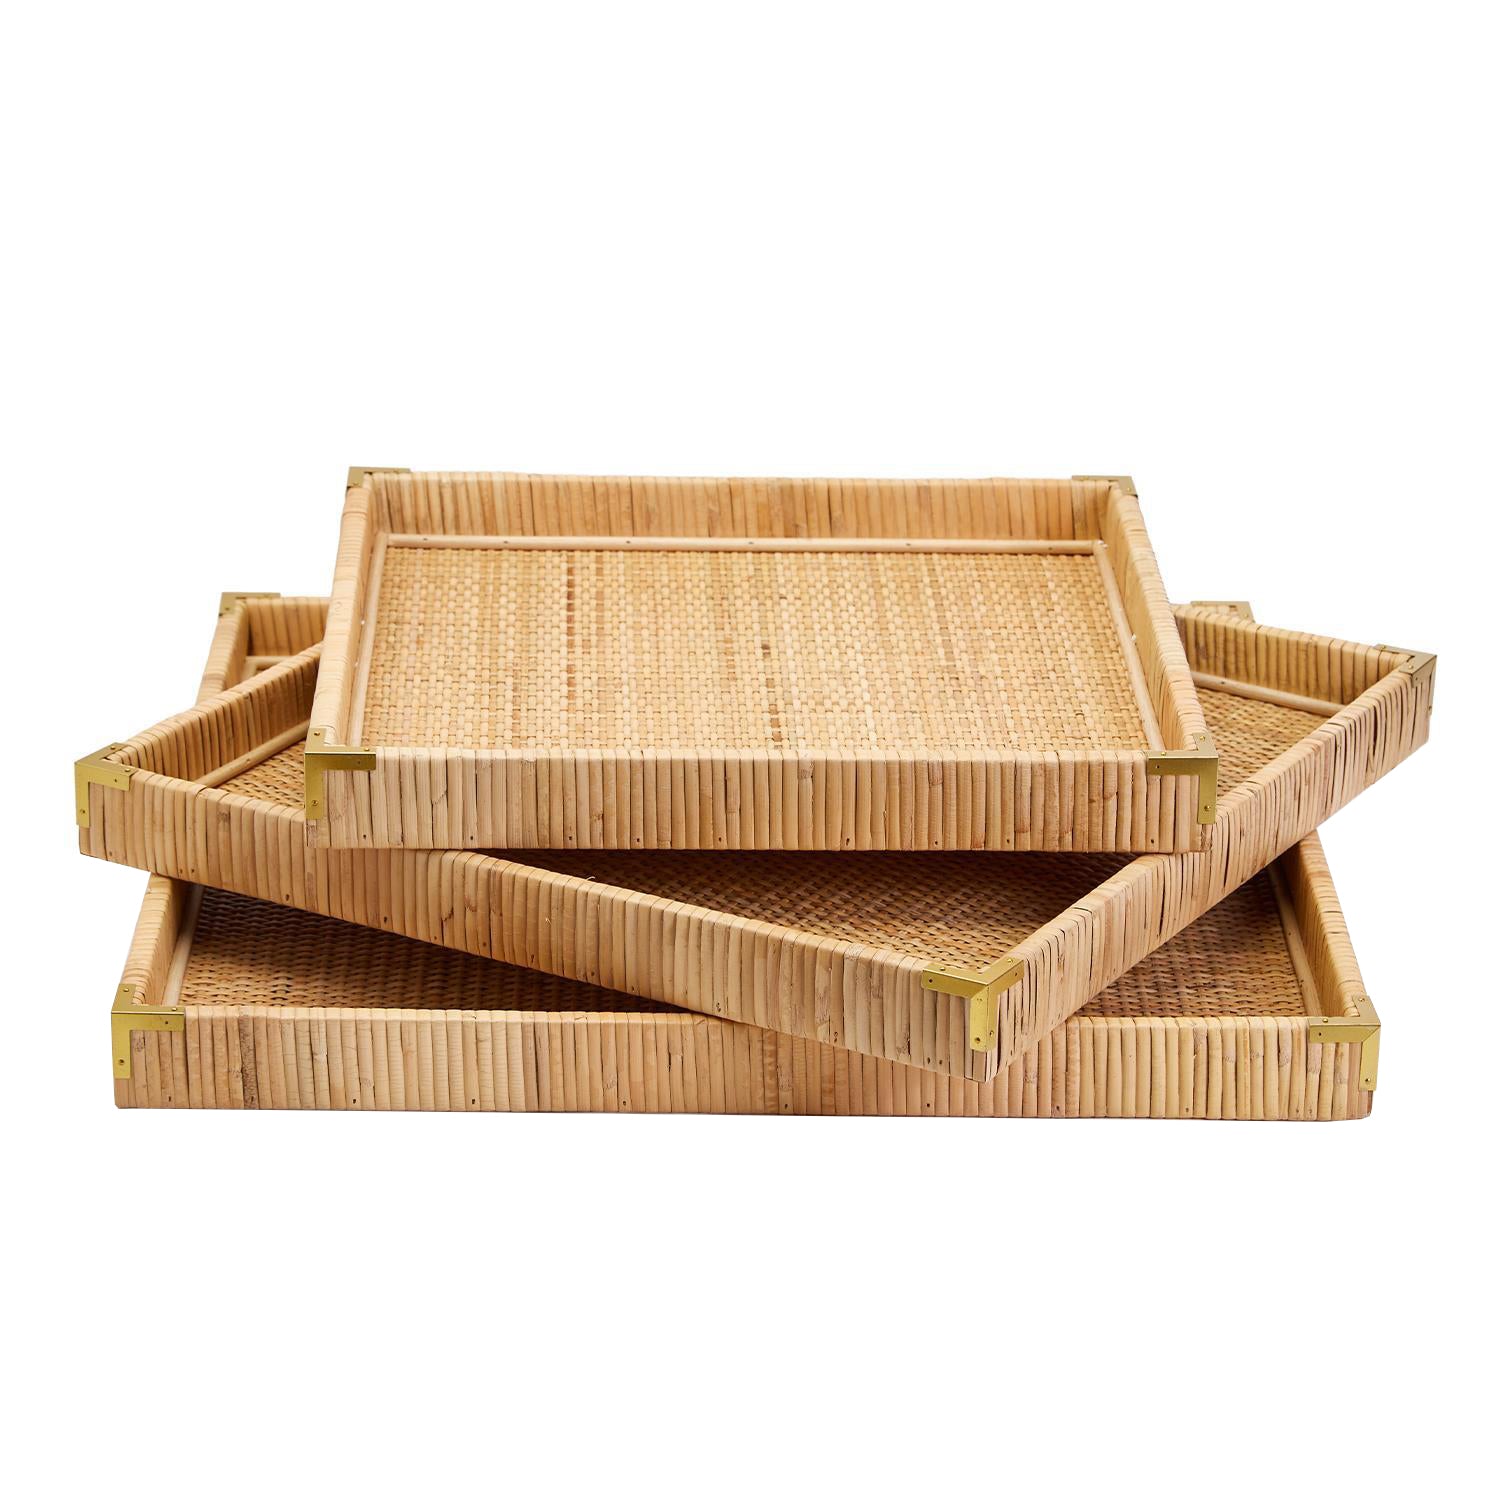 CONTEMPORARY SET OF THREE WOVEN RATTAN SQUARE TRAYS